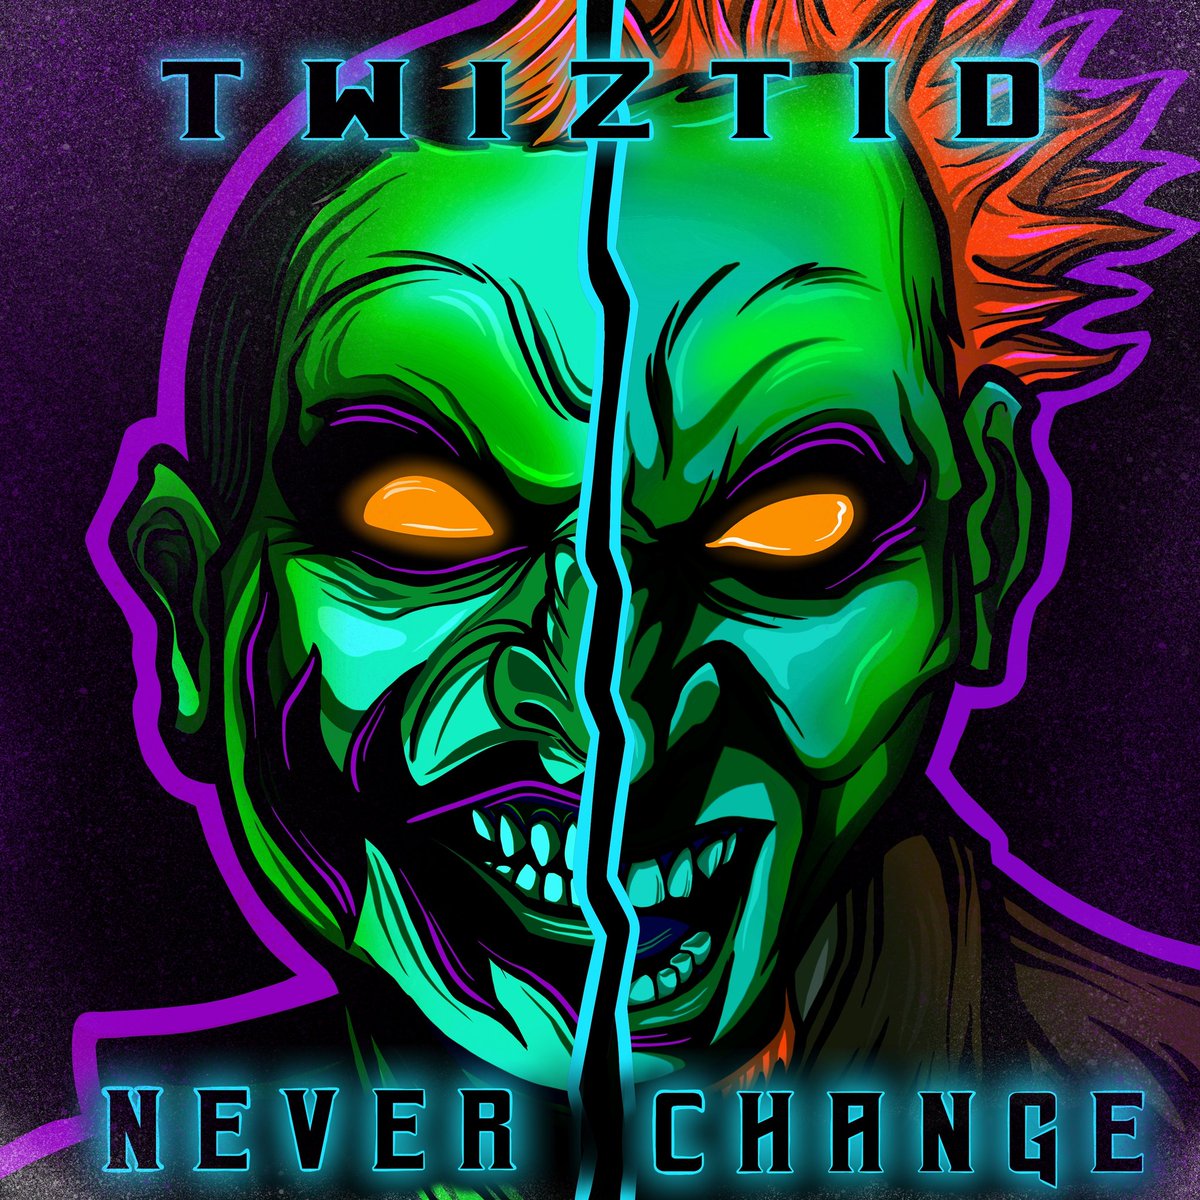 New @tweetmesohard track produced by ScatteredBrains and Mixed by ME! Go stream it now!